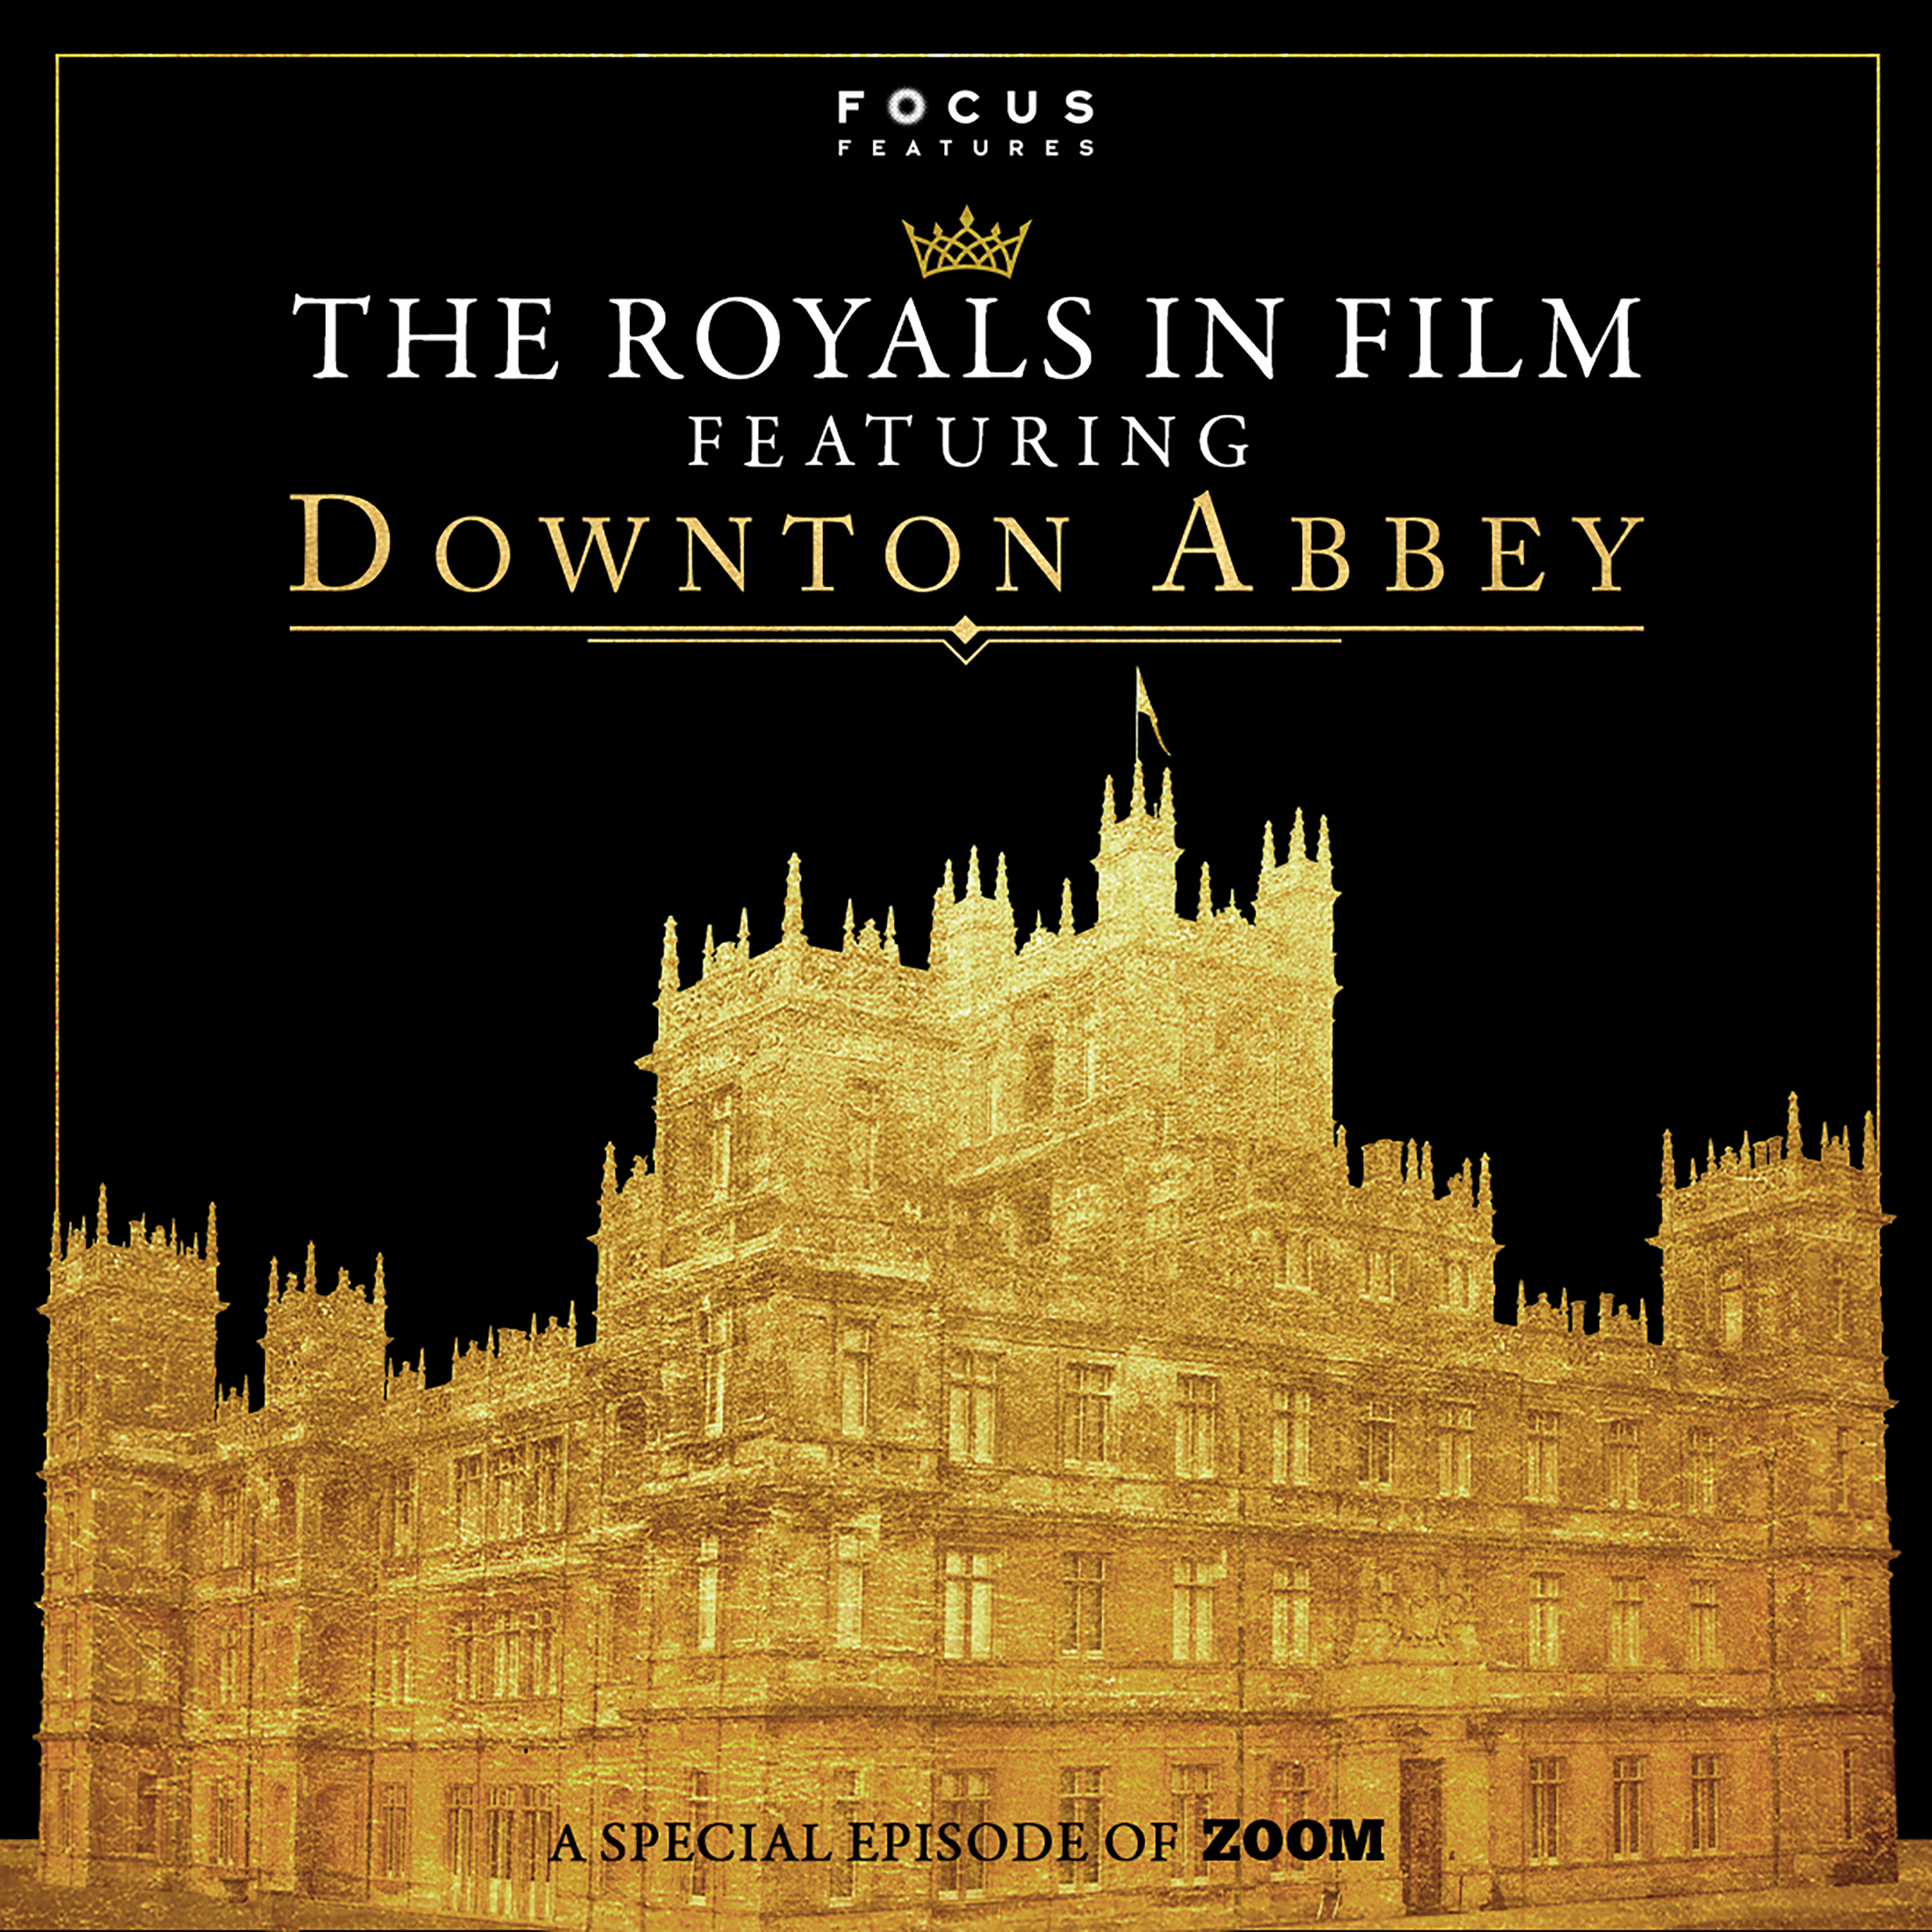 The Royals in Film ft. Downton Abbey